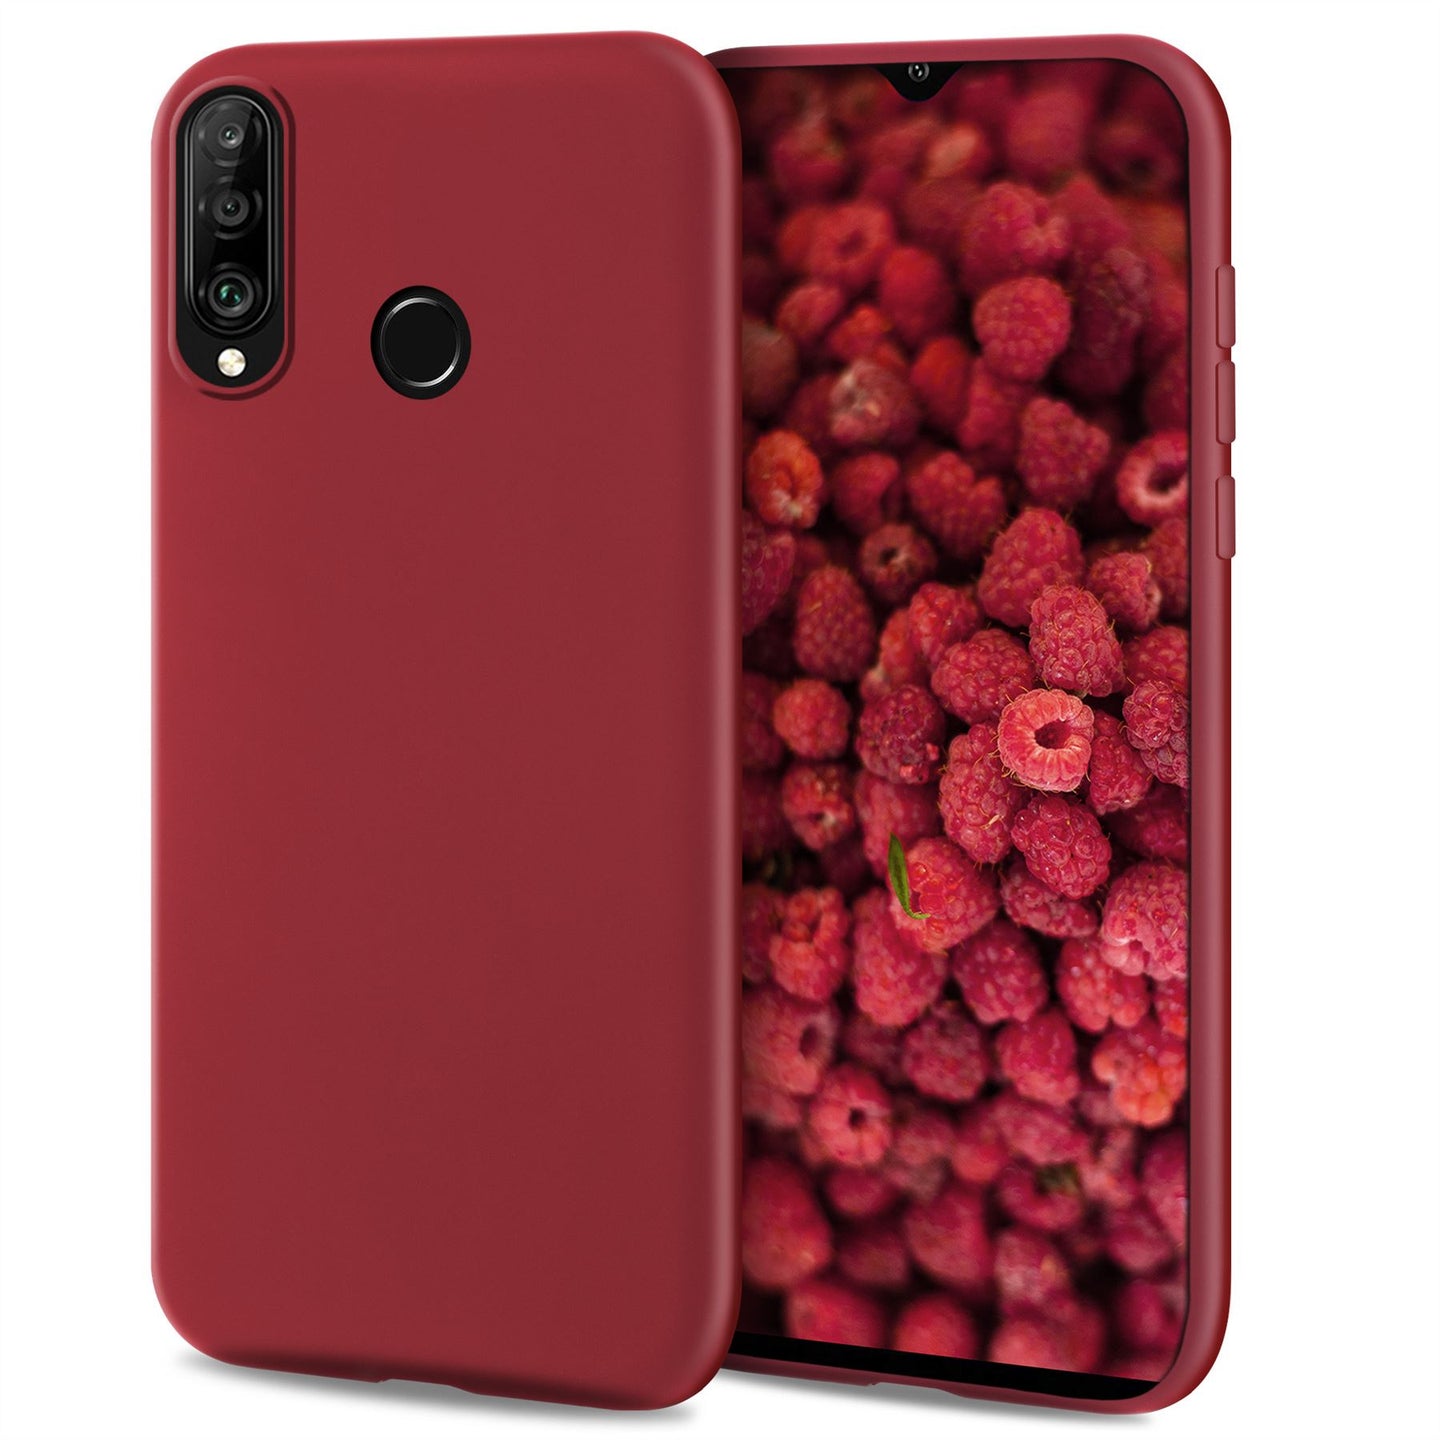 Moozy Lifestyle. Designed for Huawei P30 Lite Case, Vintage Pink - Liquid Silicone Cover with Matte Finish and Soft Microfiber Lining